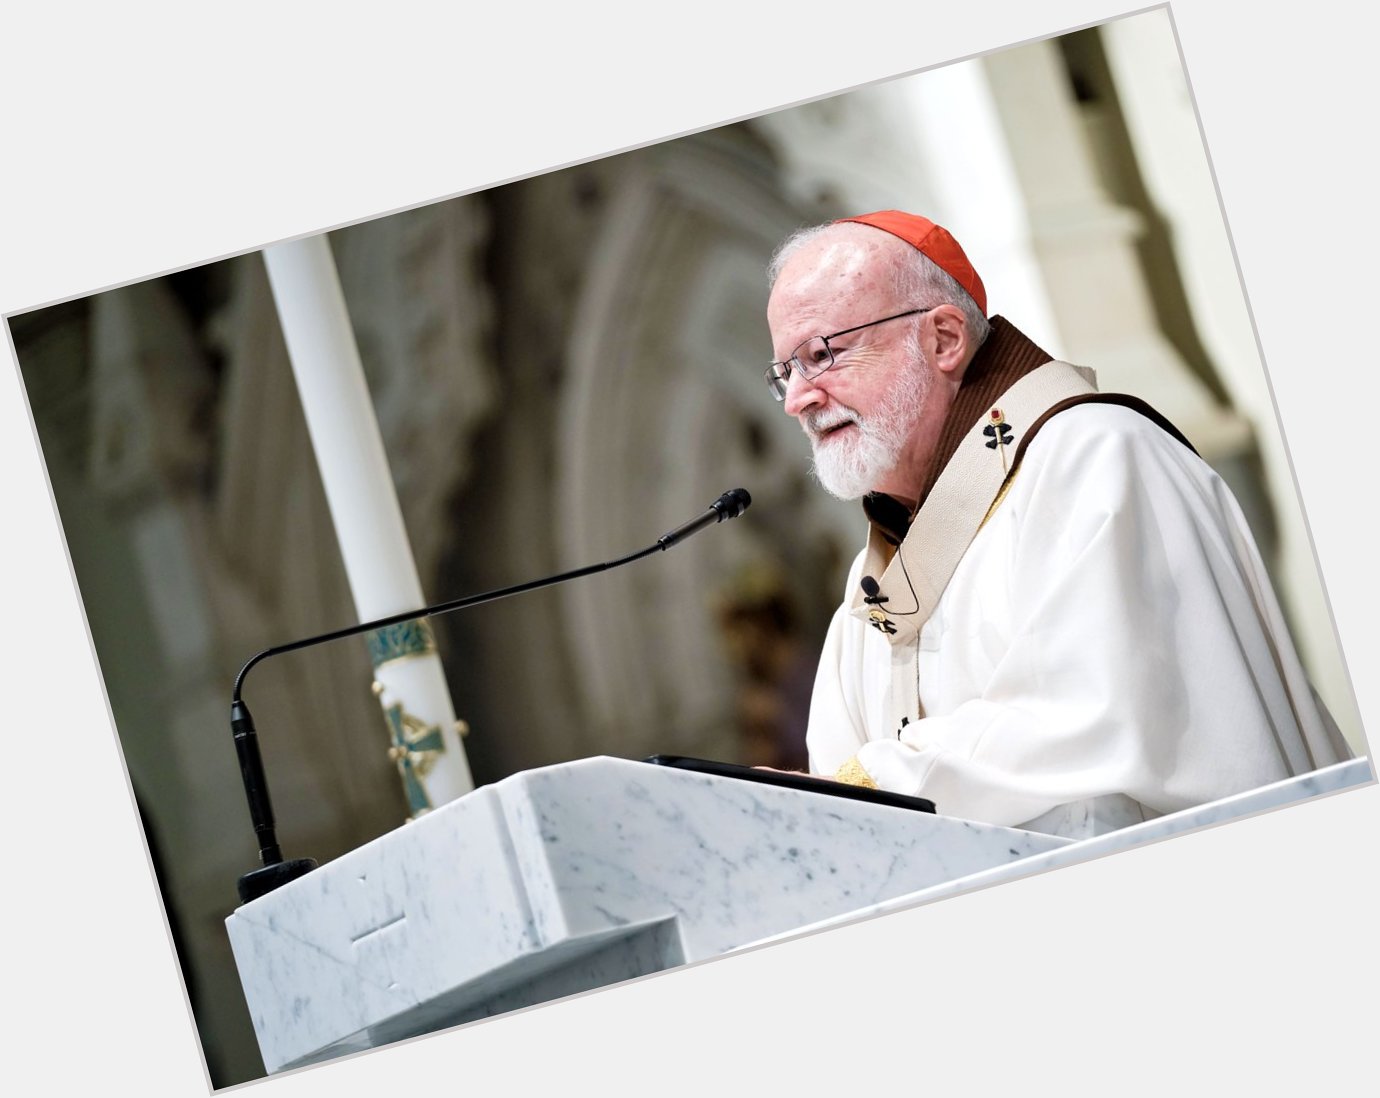 Happy birthday to our Pastor and Archbishop, Cardinal Seán Patrick O\Malley! 